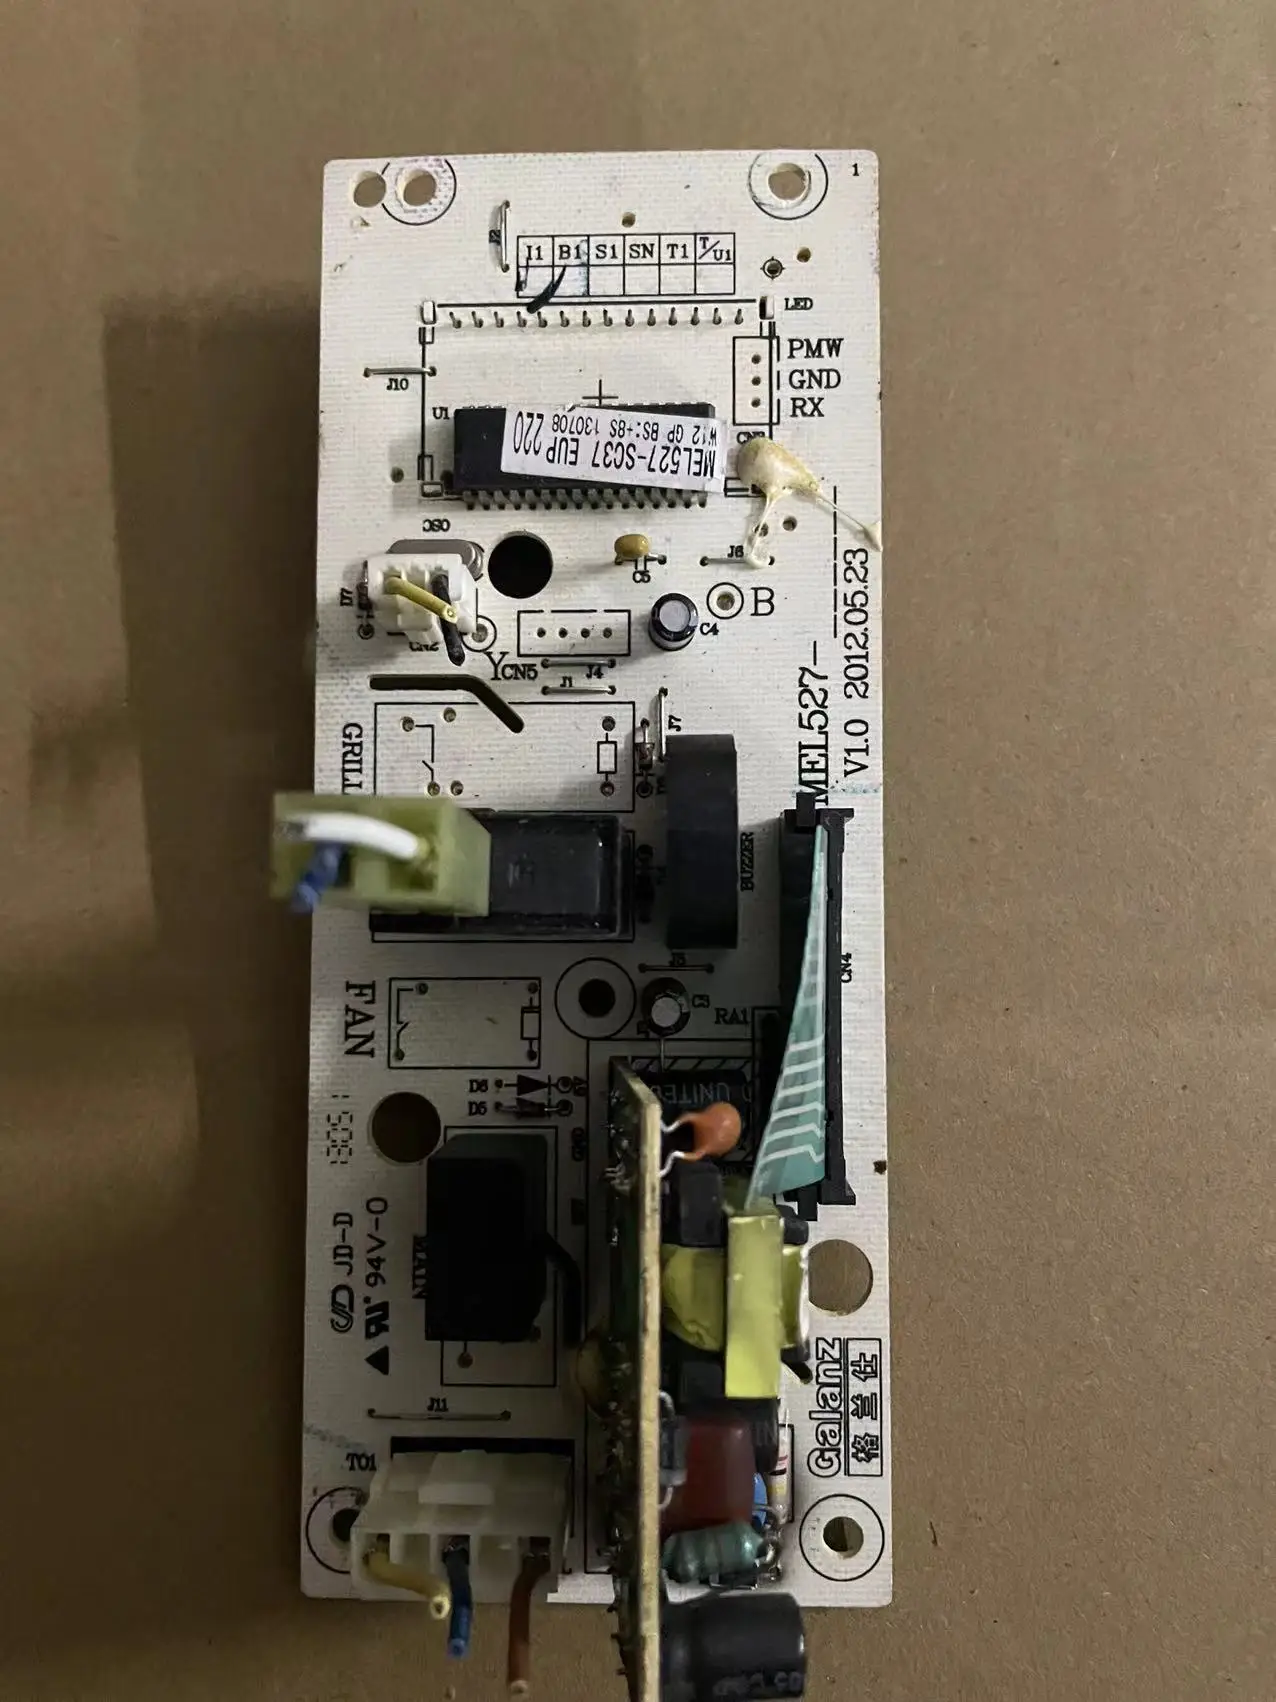 

Applicable to Galanz microwave oven computer board P70F20CL-DG (BO) MEL527-SC37